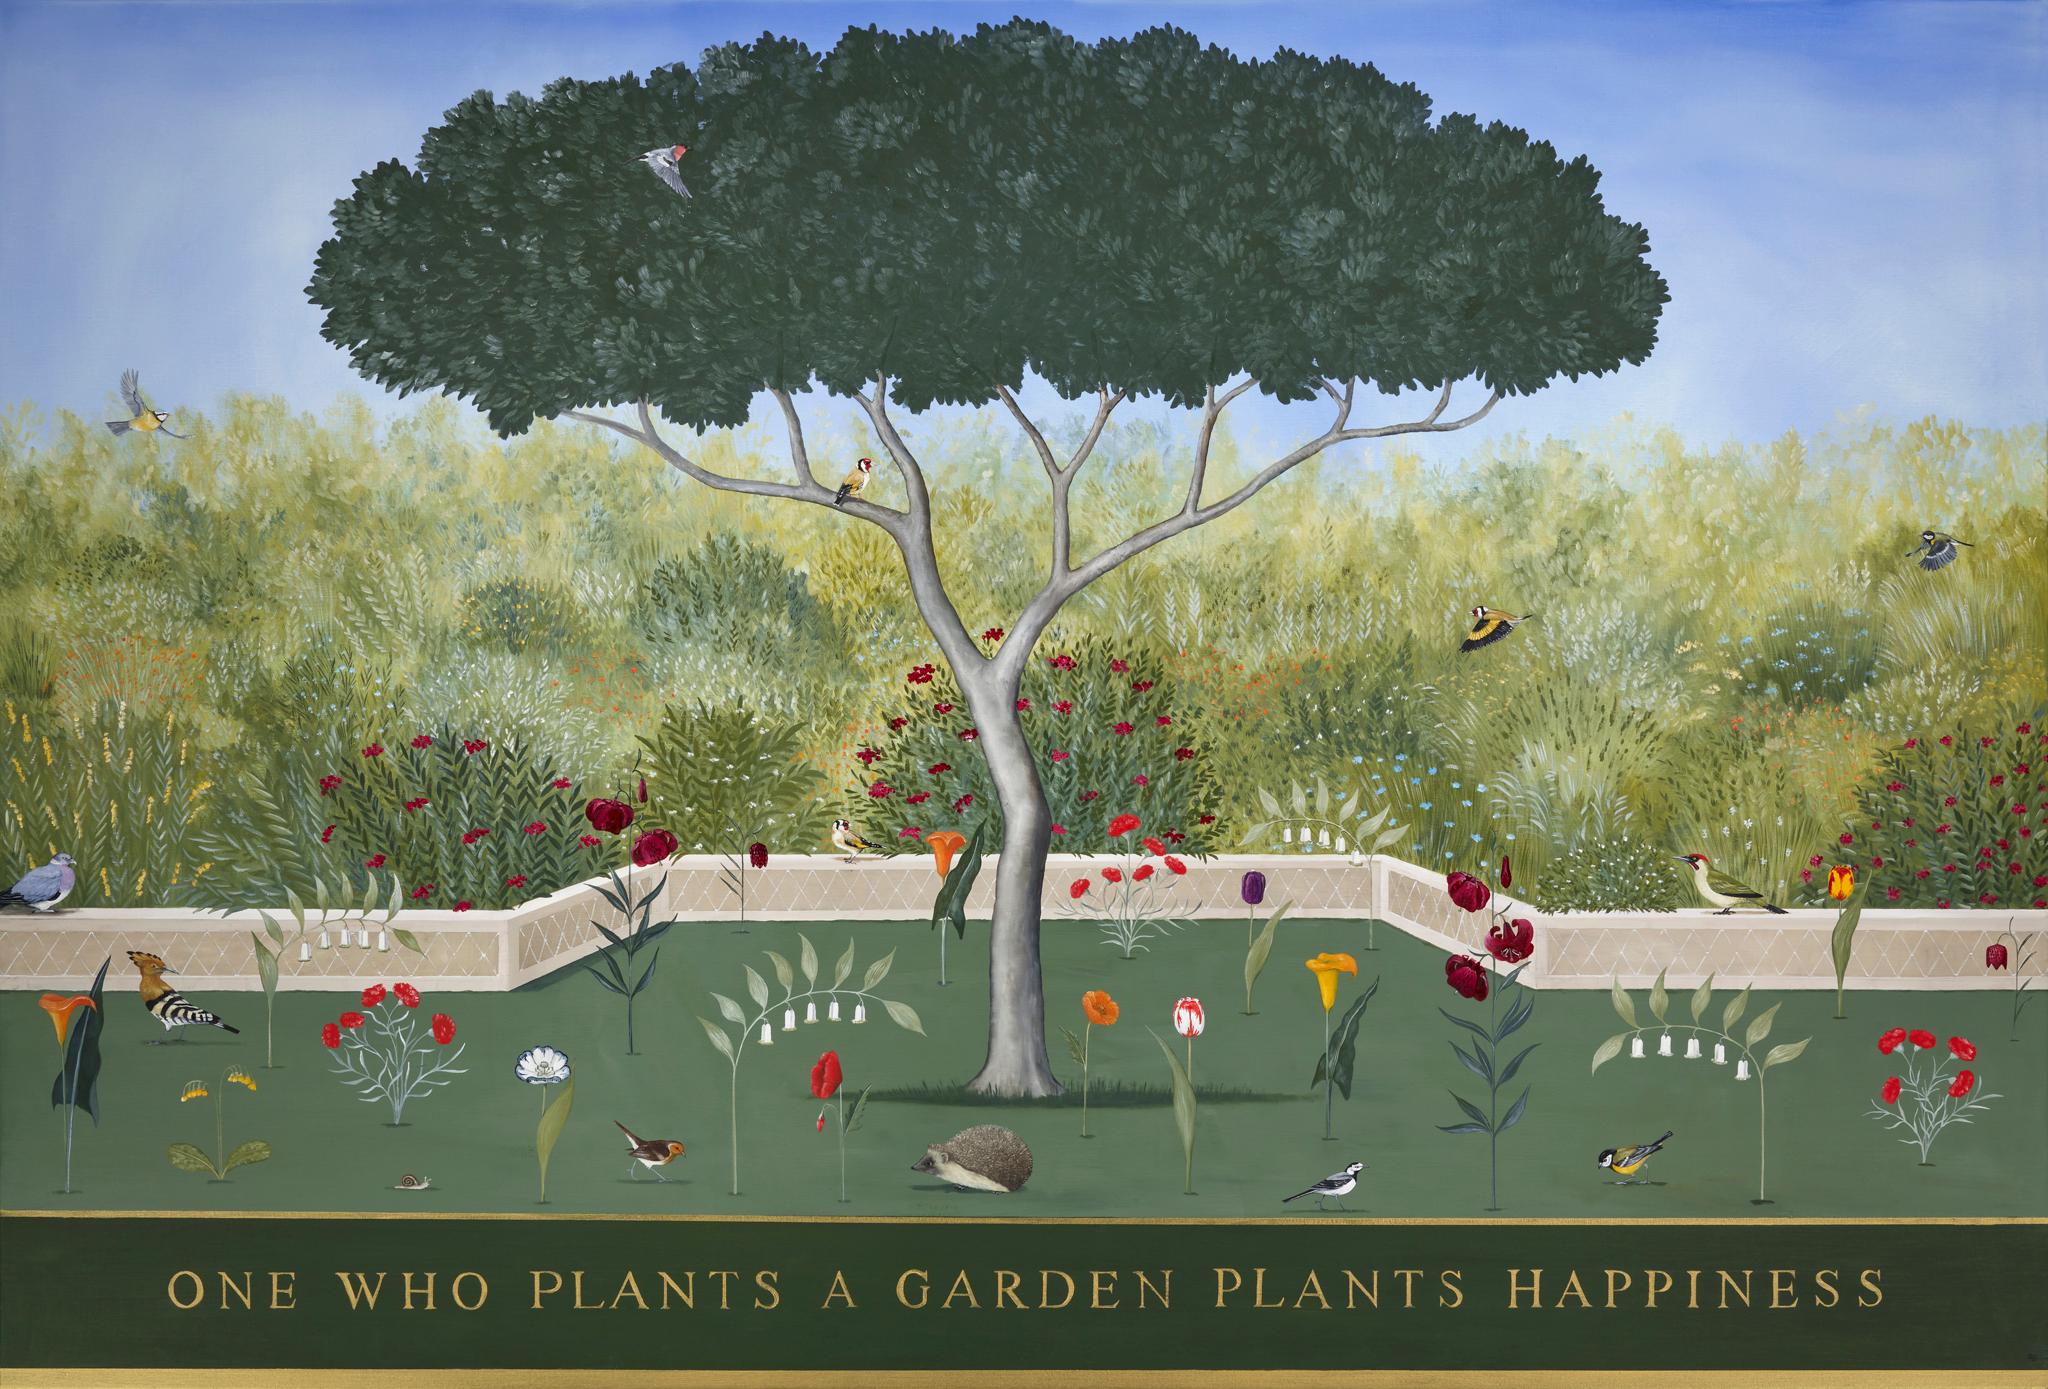 ONE WHO PLANTS A GARDEN PLANTS HAPPINESS